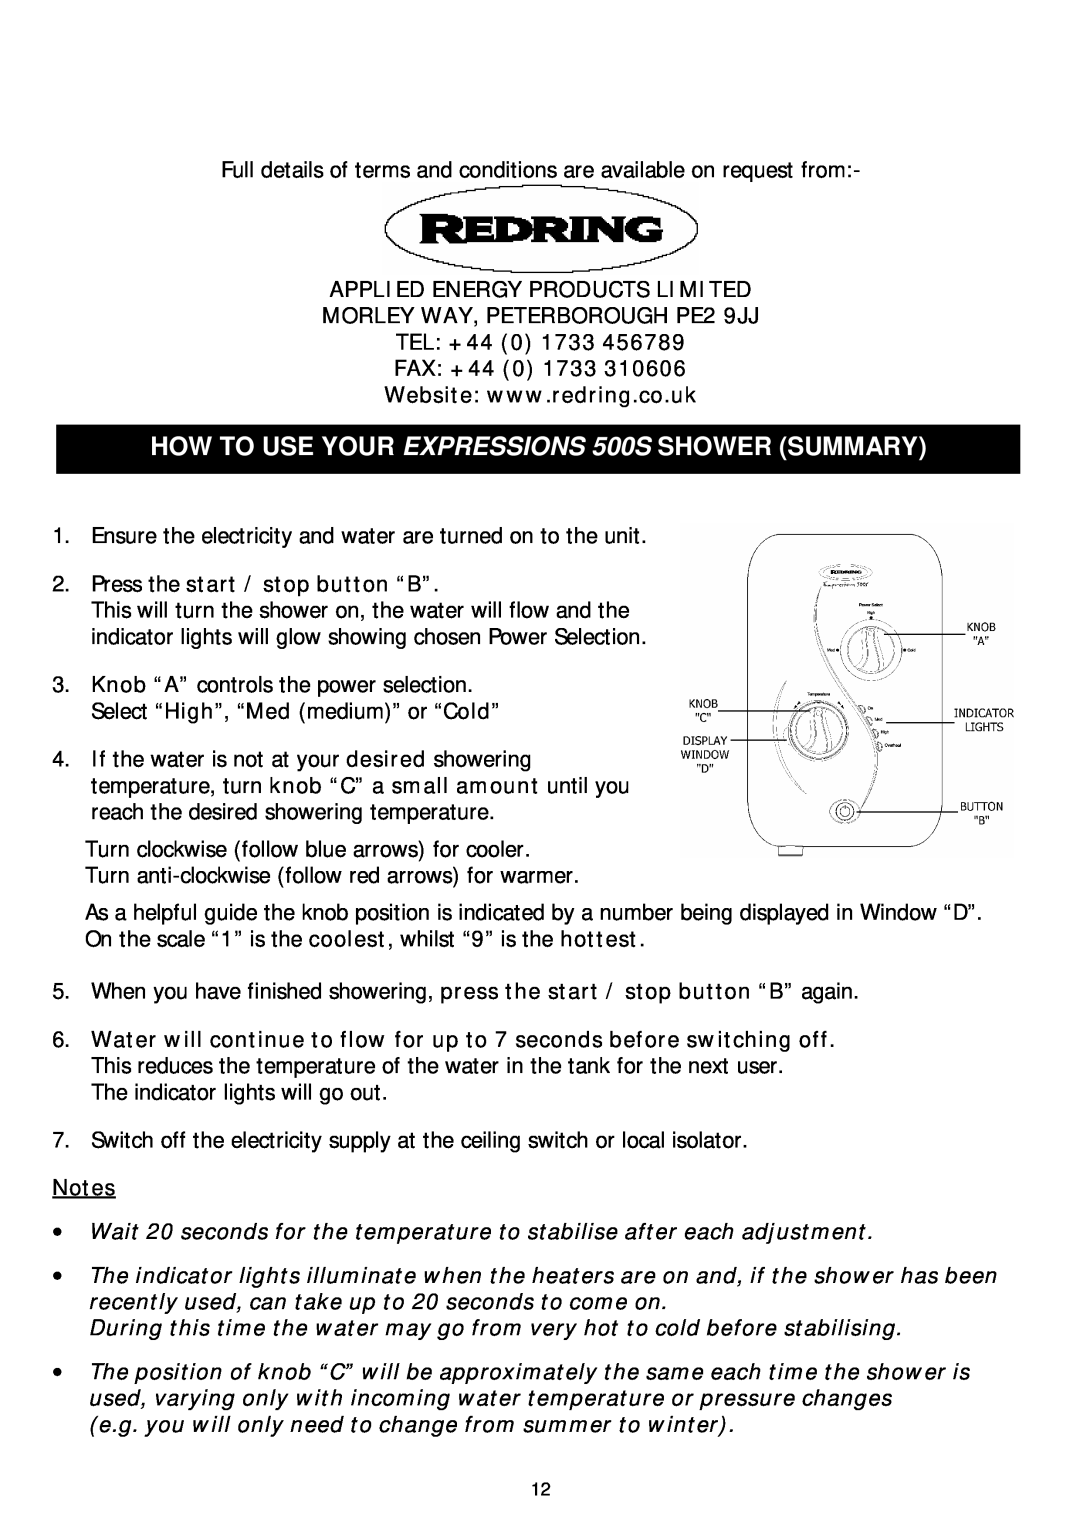 Redring manual HOW TO USE YOUR EXPRESSIONS 500S SHOWER SUMMARY, Applied Energy Products Limited 